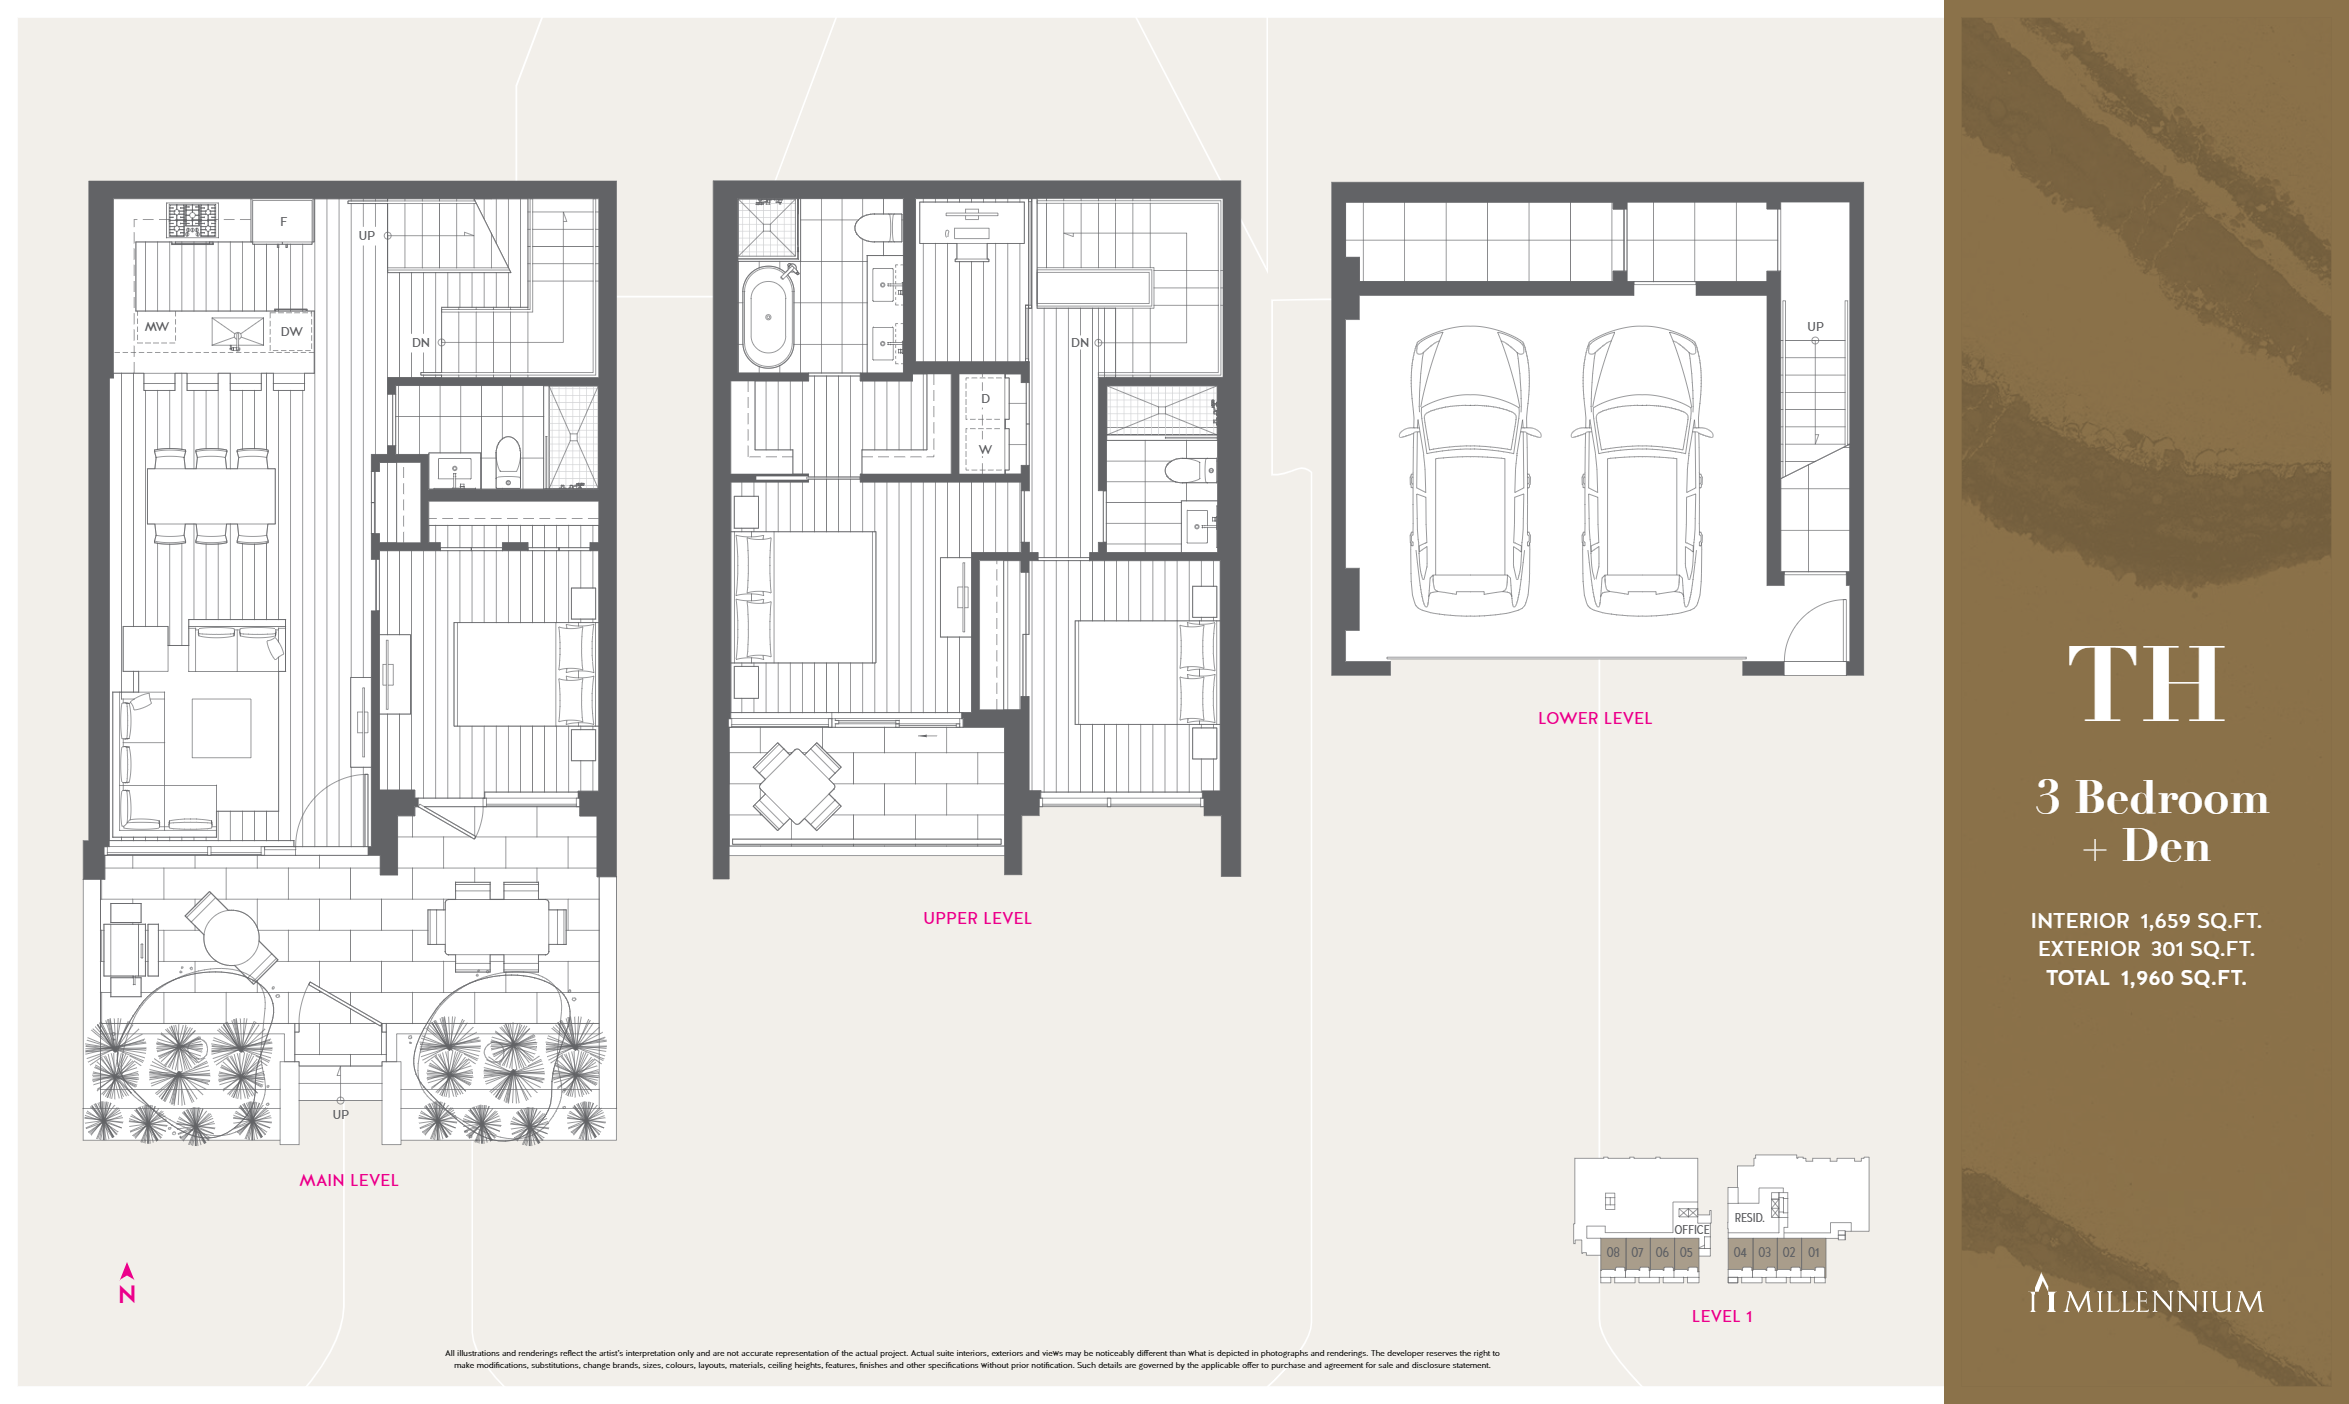  Floor Plan of Millennium Central Lonsdale Condos with undefined beds